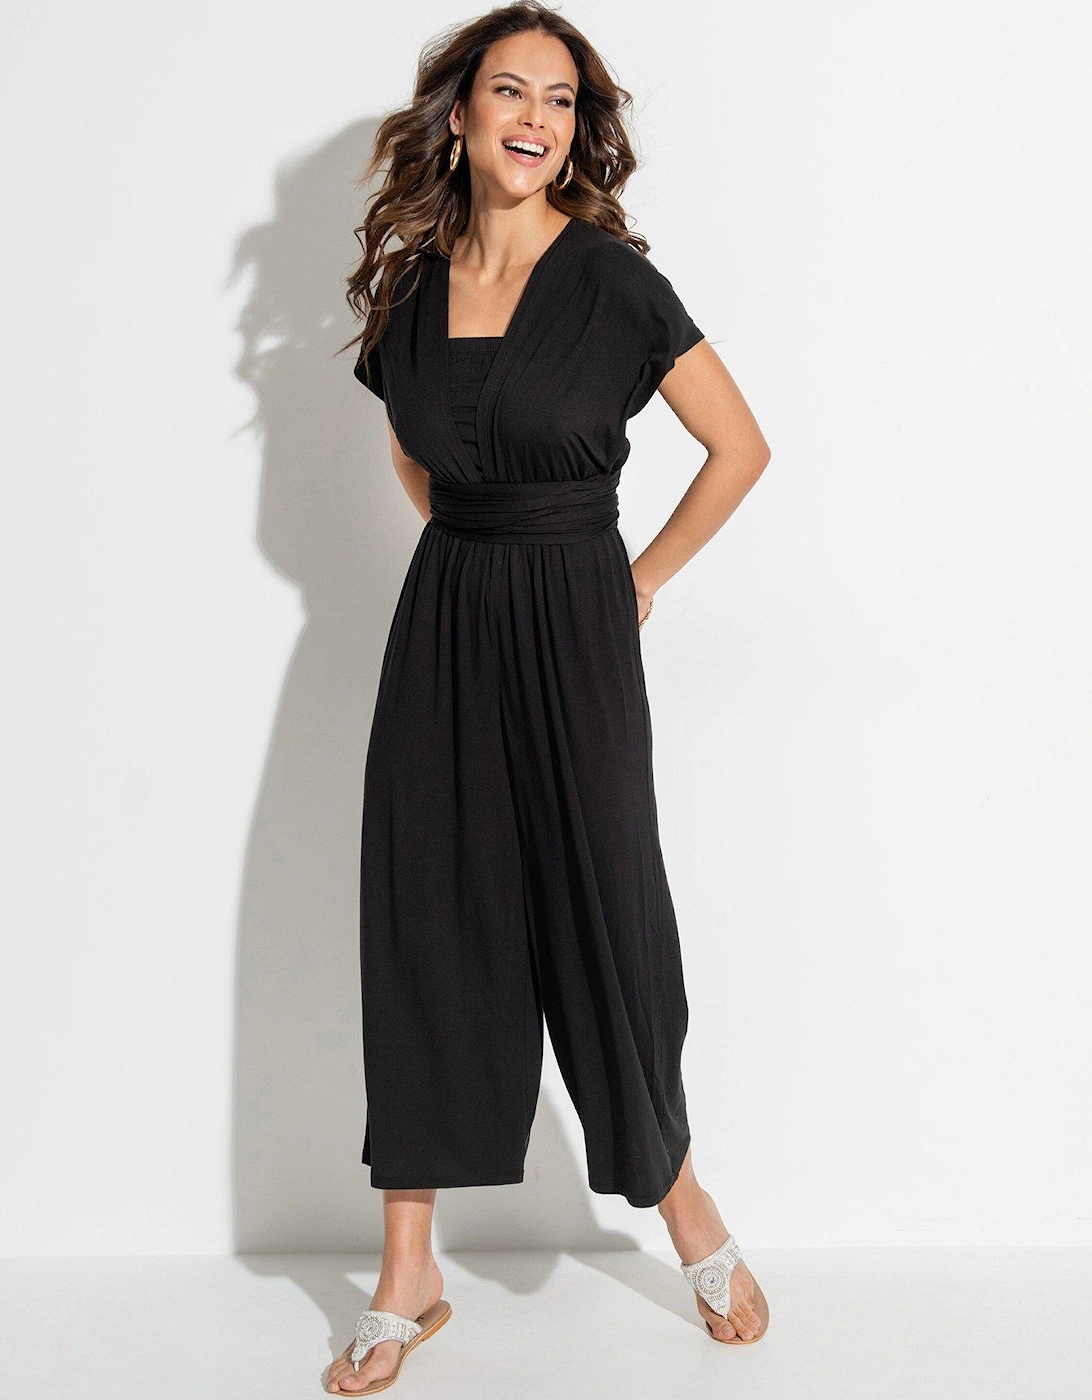 Multiway Jersey Beach Jumpsuit with LENZING ECOVERO Viscose fibres - Black, 2 of 1